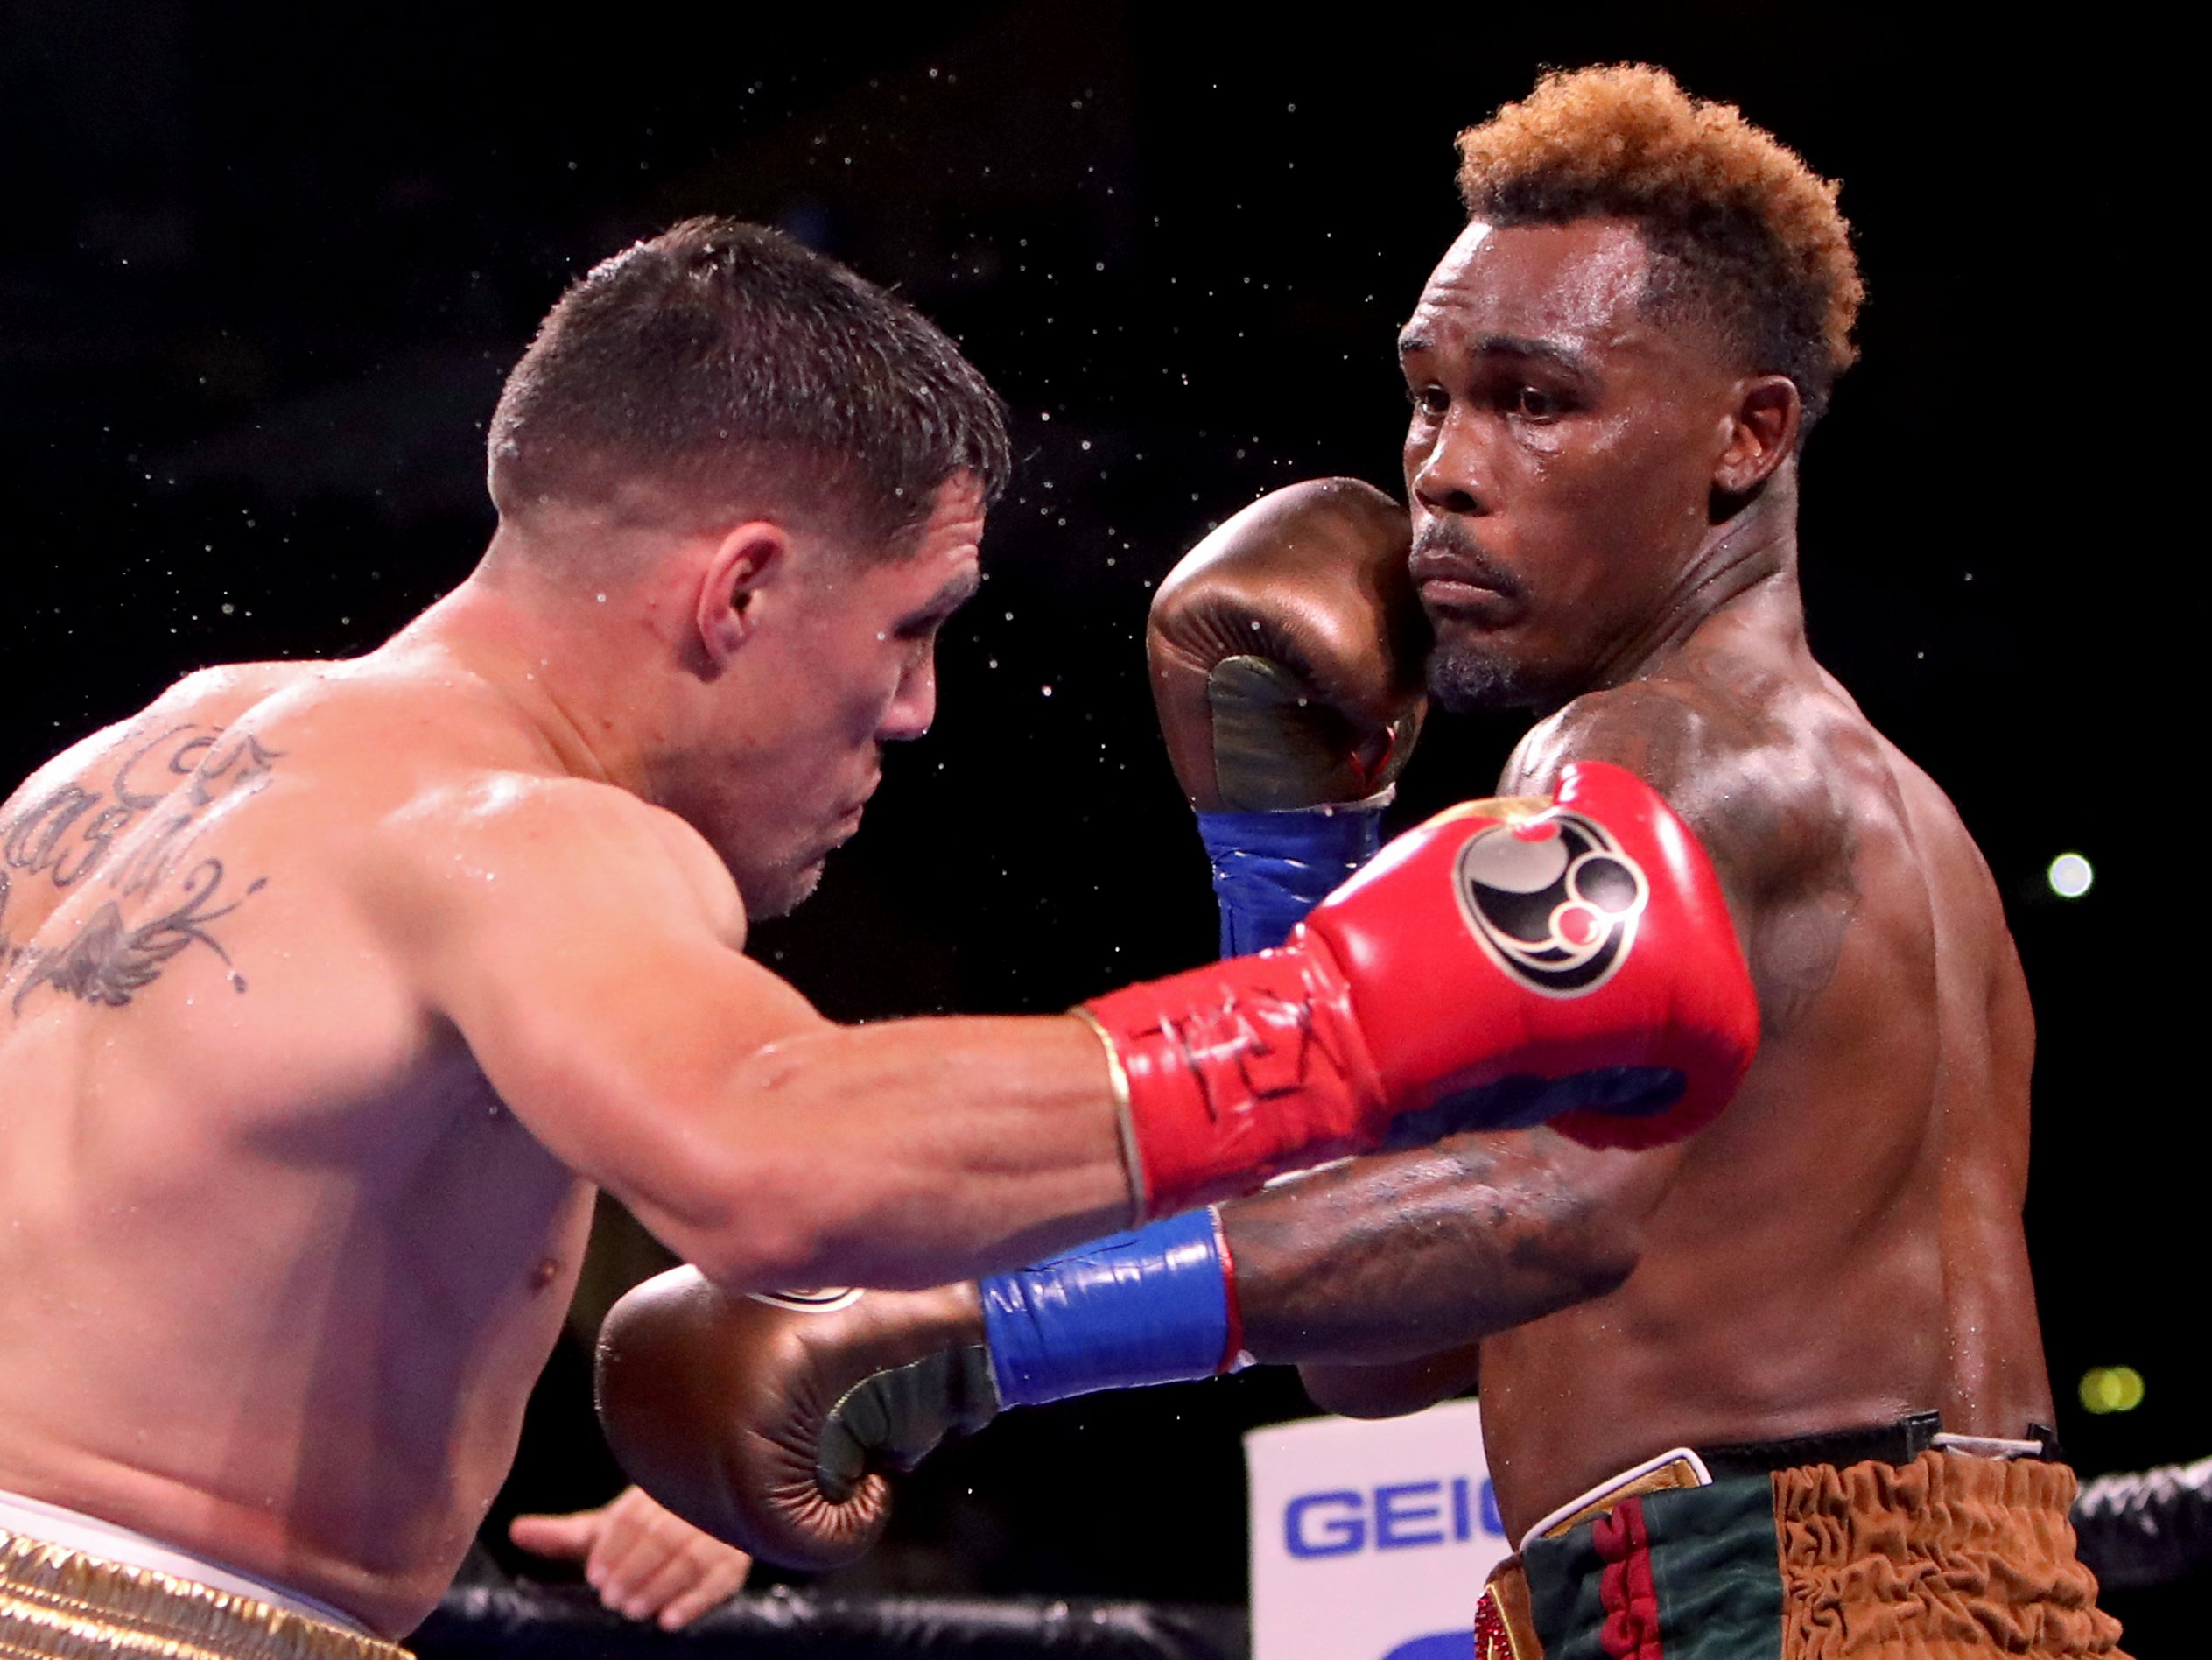 Jermell Charlo vs Brian Castano time When are ring walks in UK and US for fight this weekend? The Independent